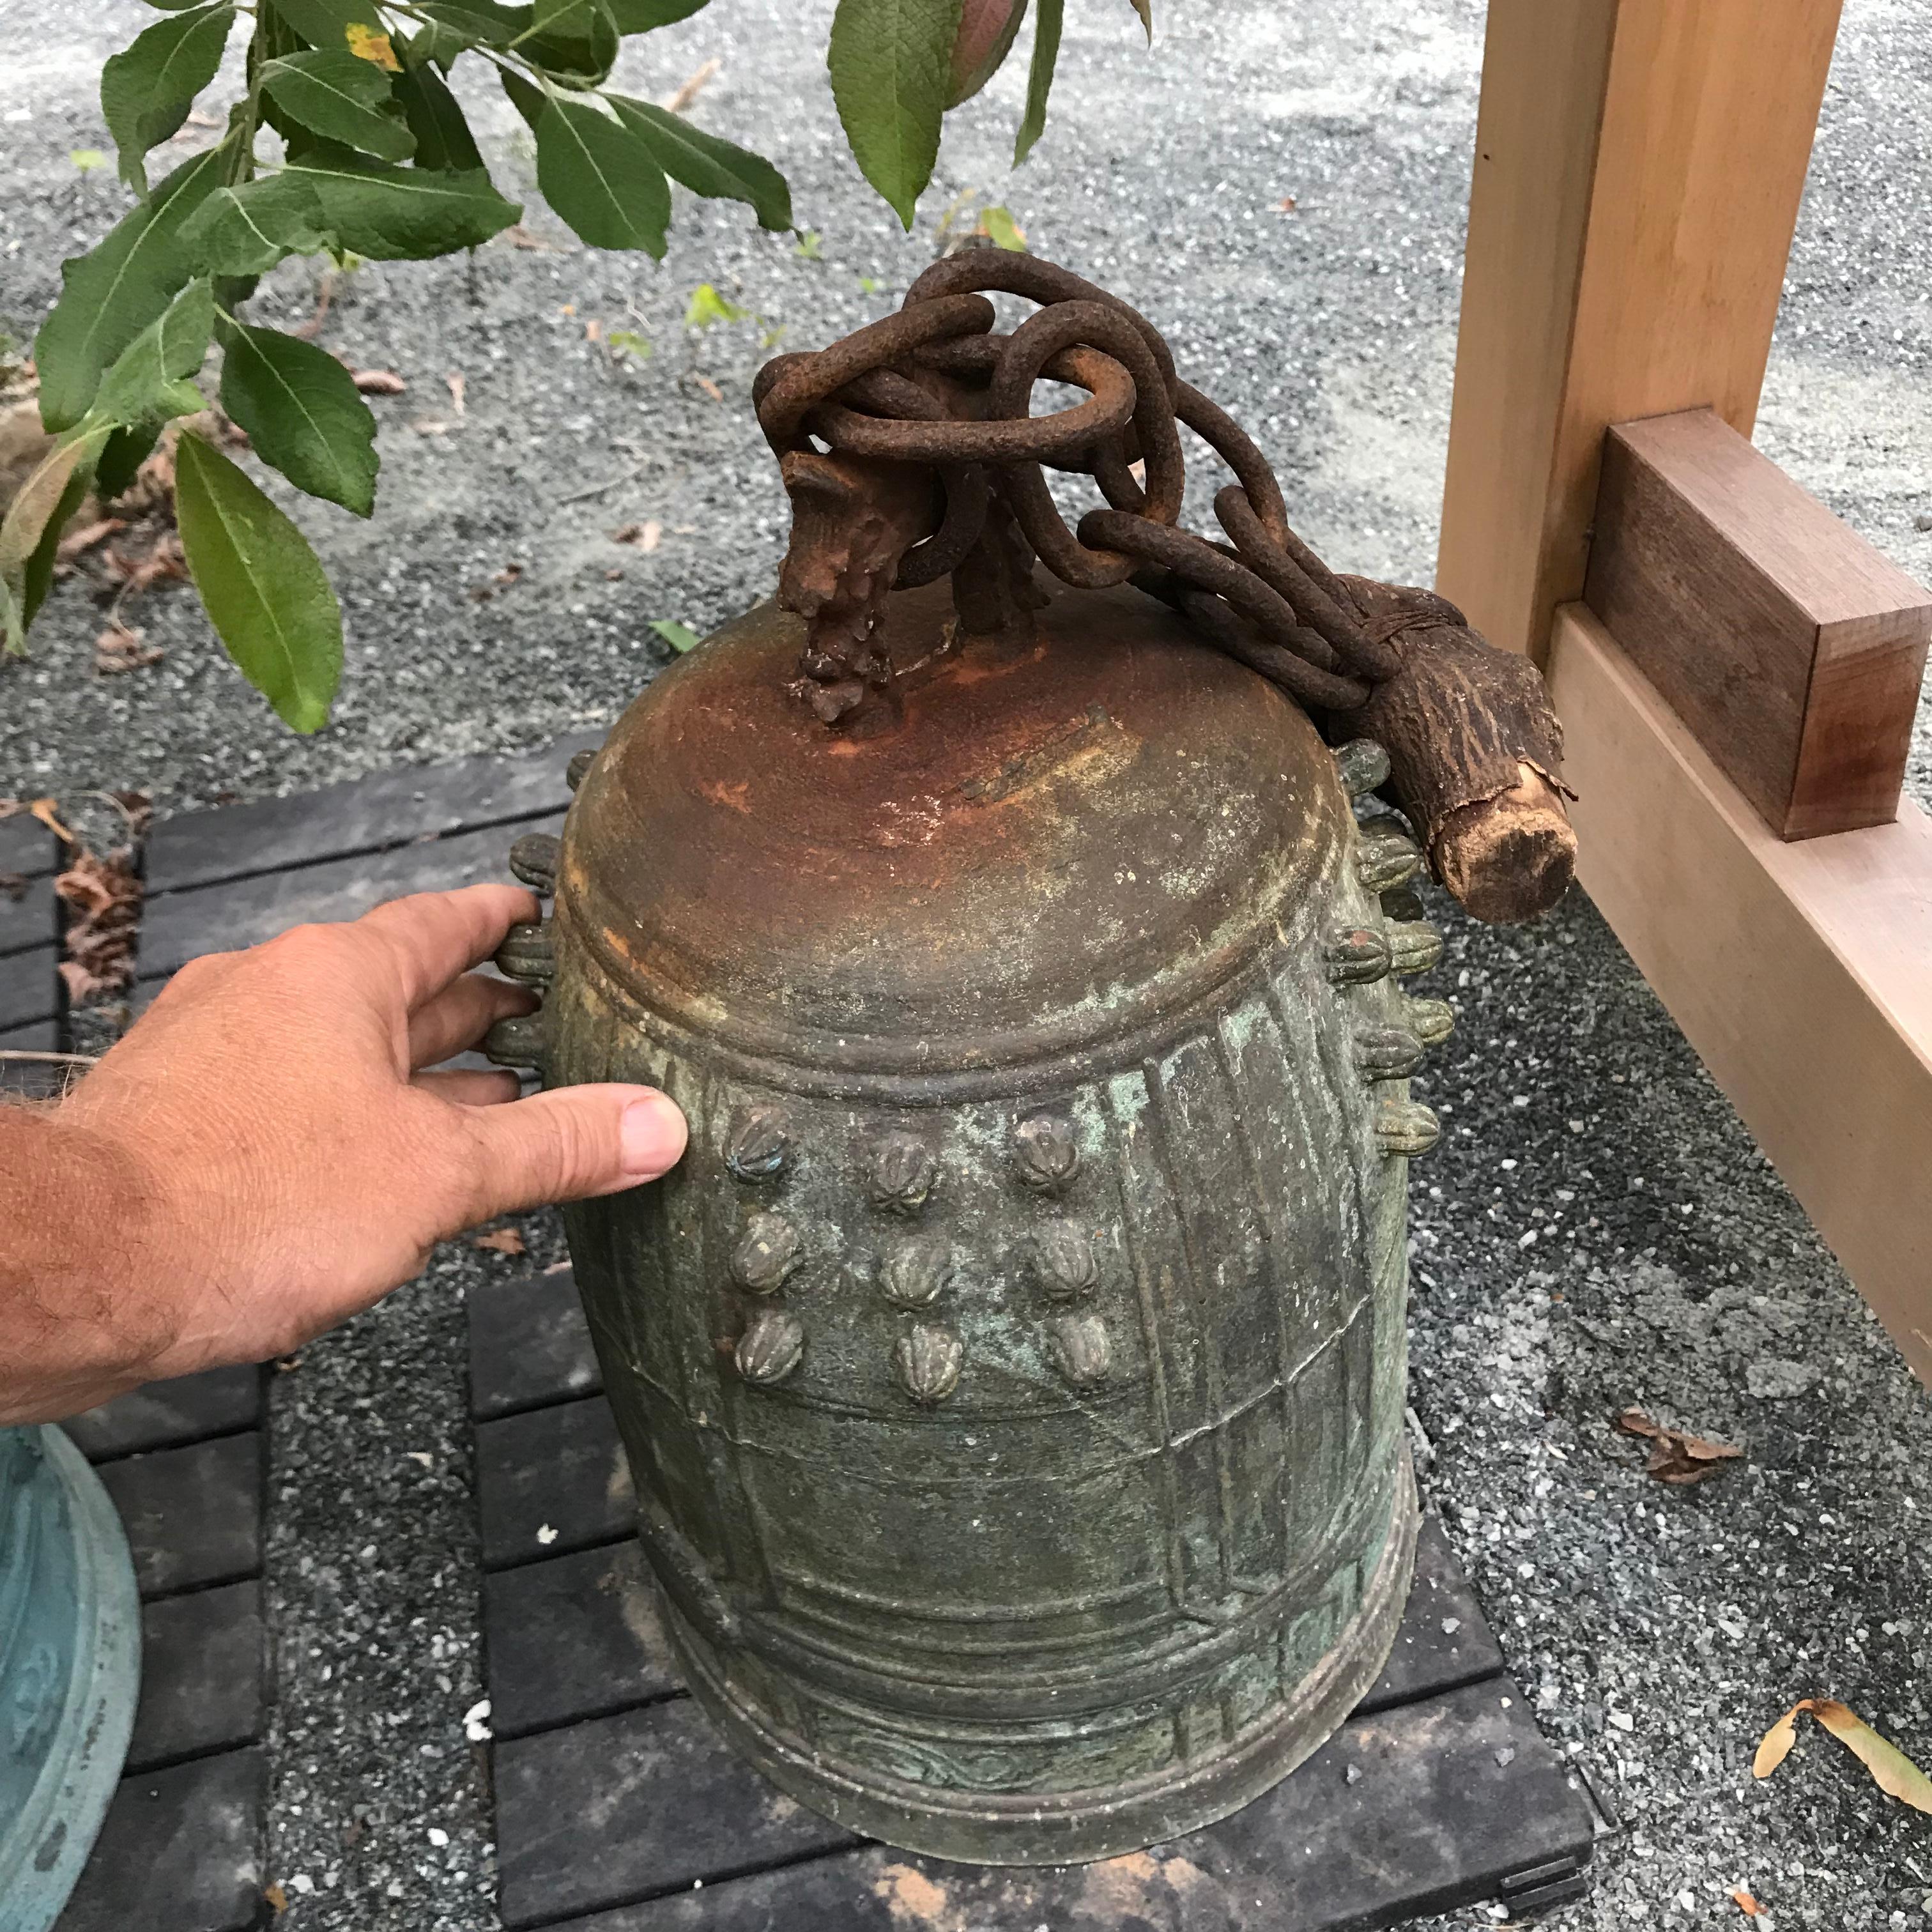 An unusual and unique find from Japan.

This is no ordinary antique bronze bell.

While cast in solid bronze, this one retains its original hand-wrought iron chain and yes, an original wooden limb piece at the end of the chain from where it had